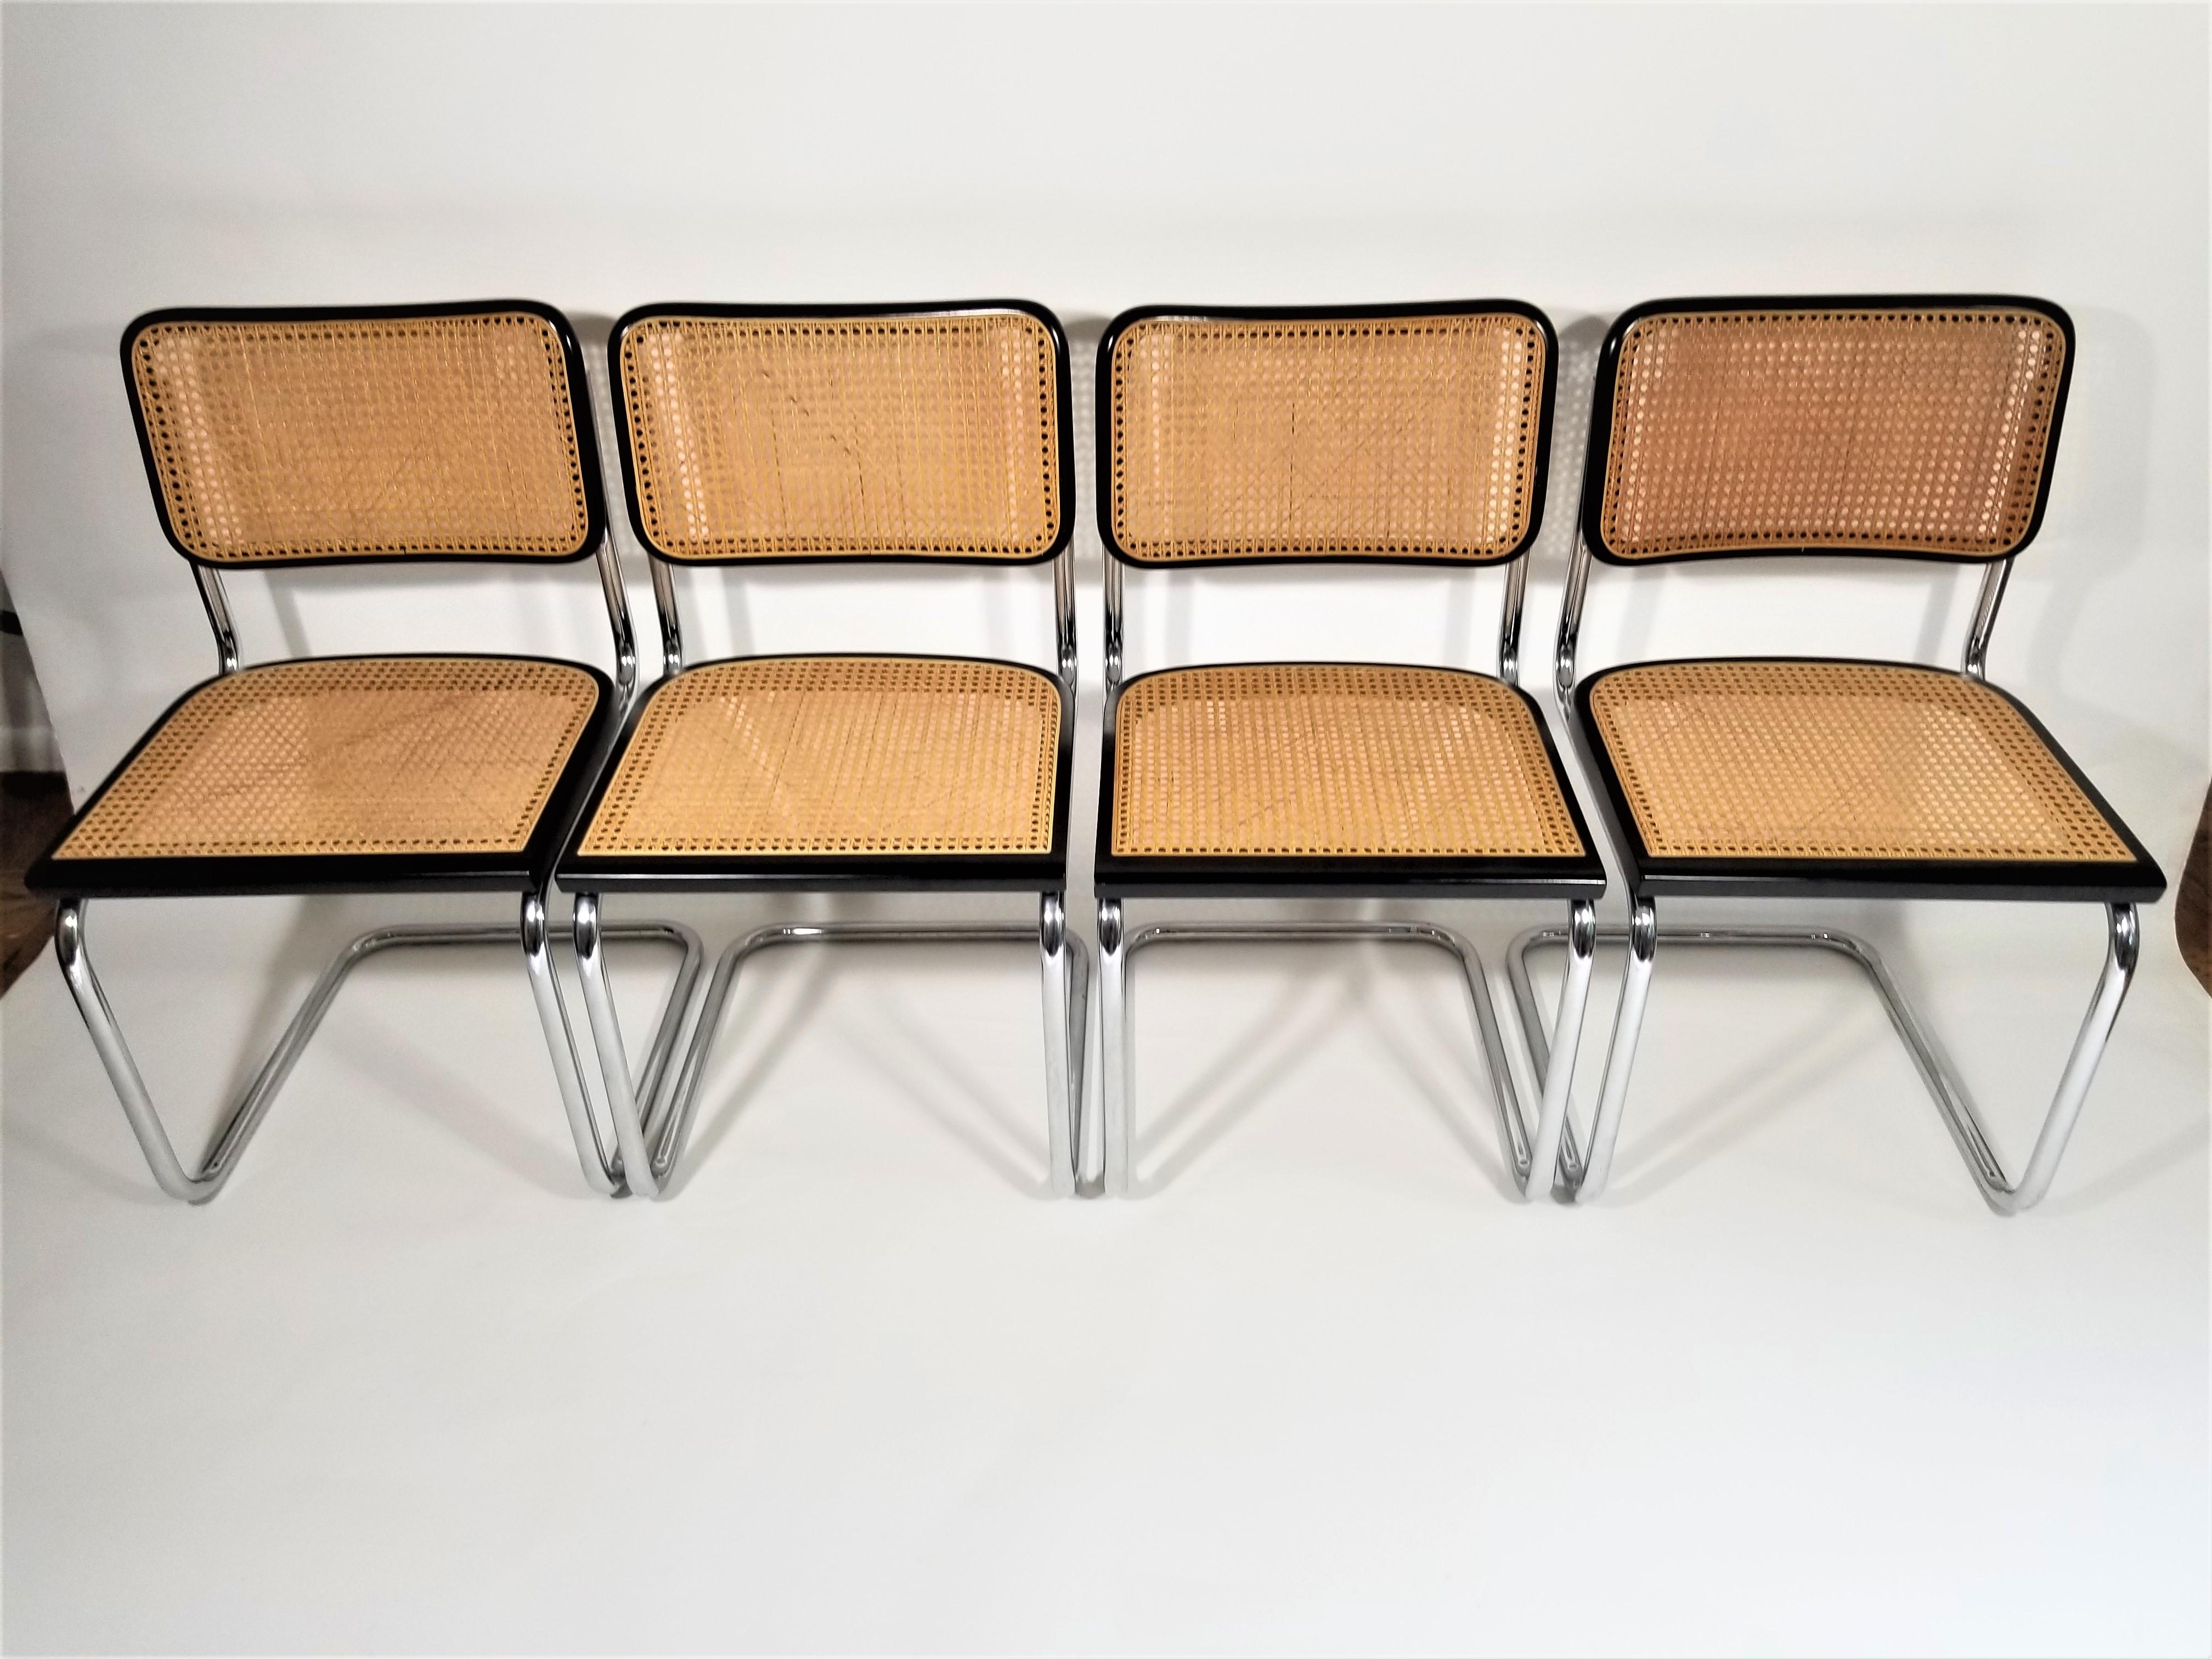 Set of 4 Marcel Breuer Cesca side chairs with black finish. Cane seats and backs. Classic chrome cantilever frames. We polish all chrome.